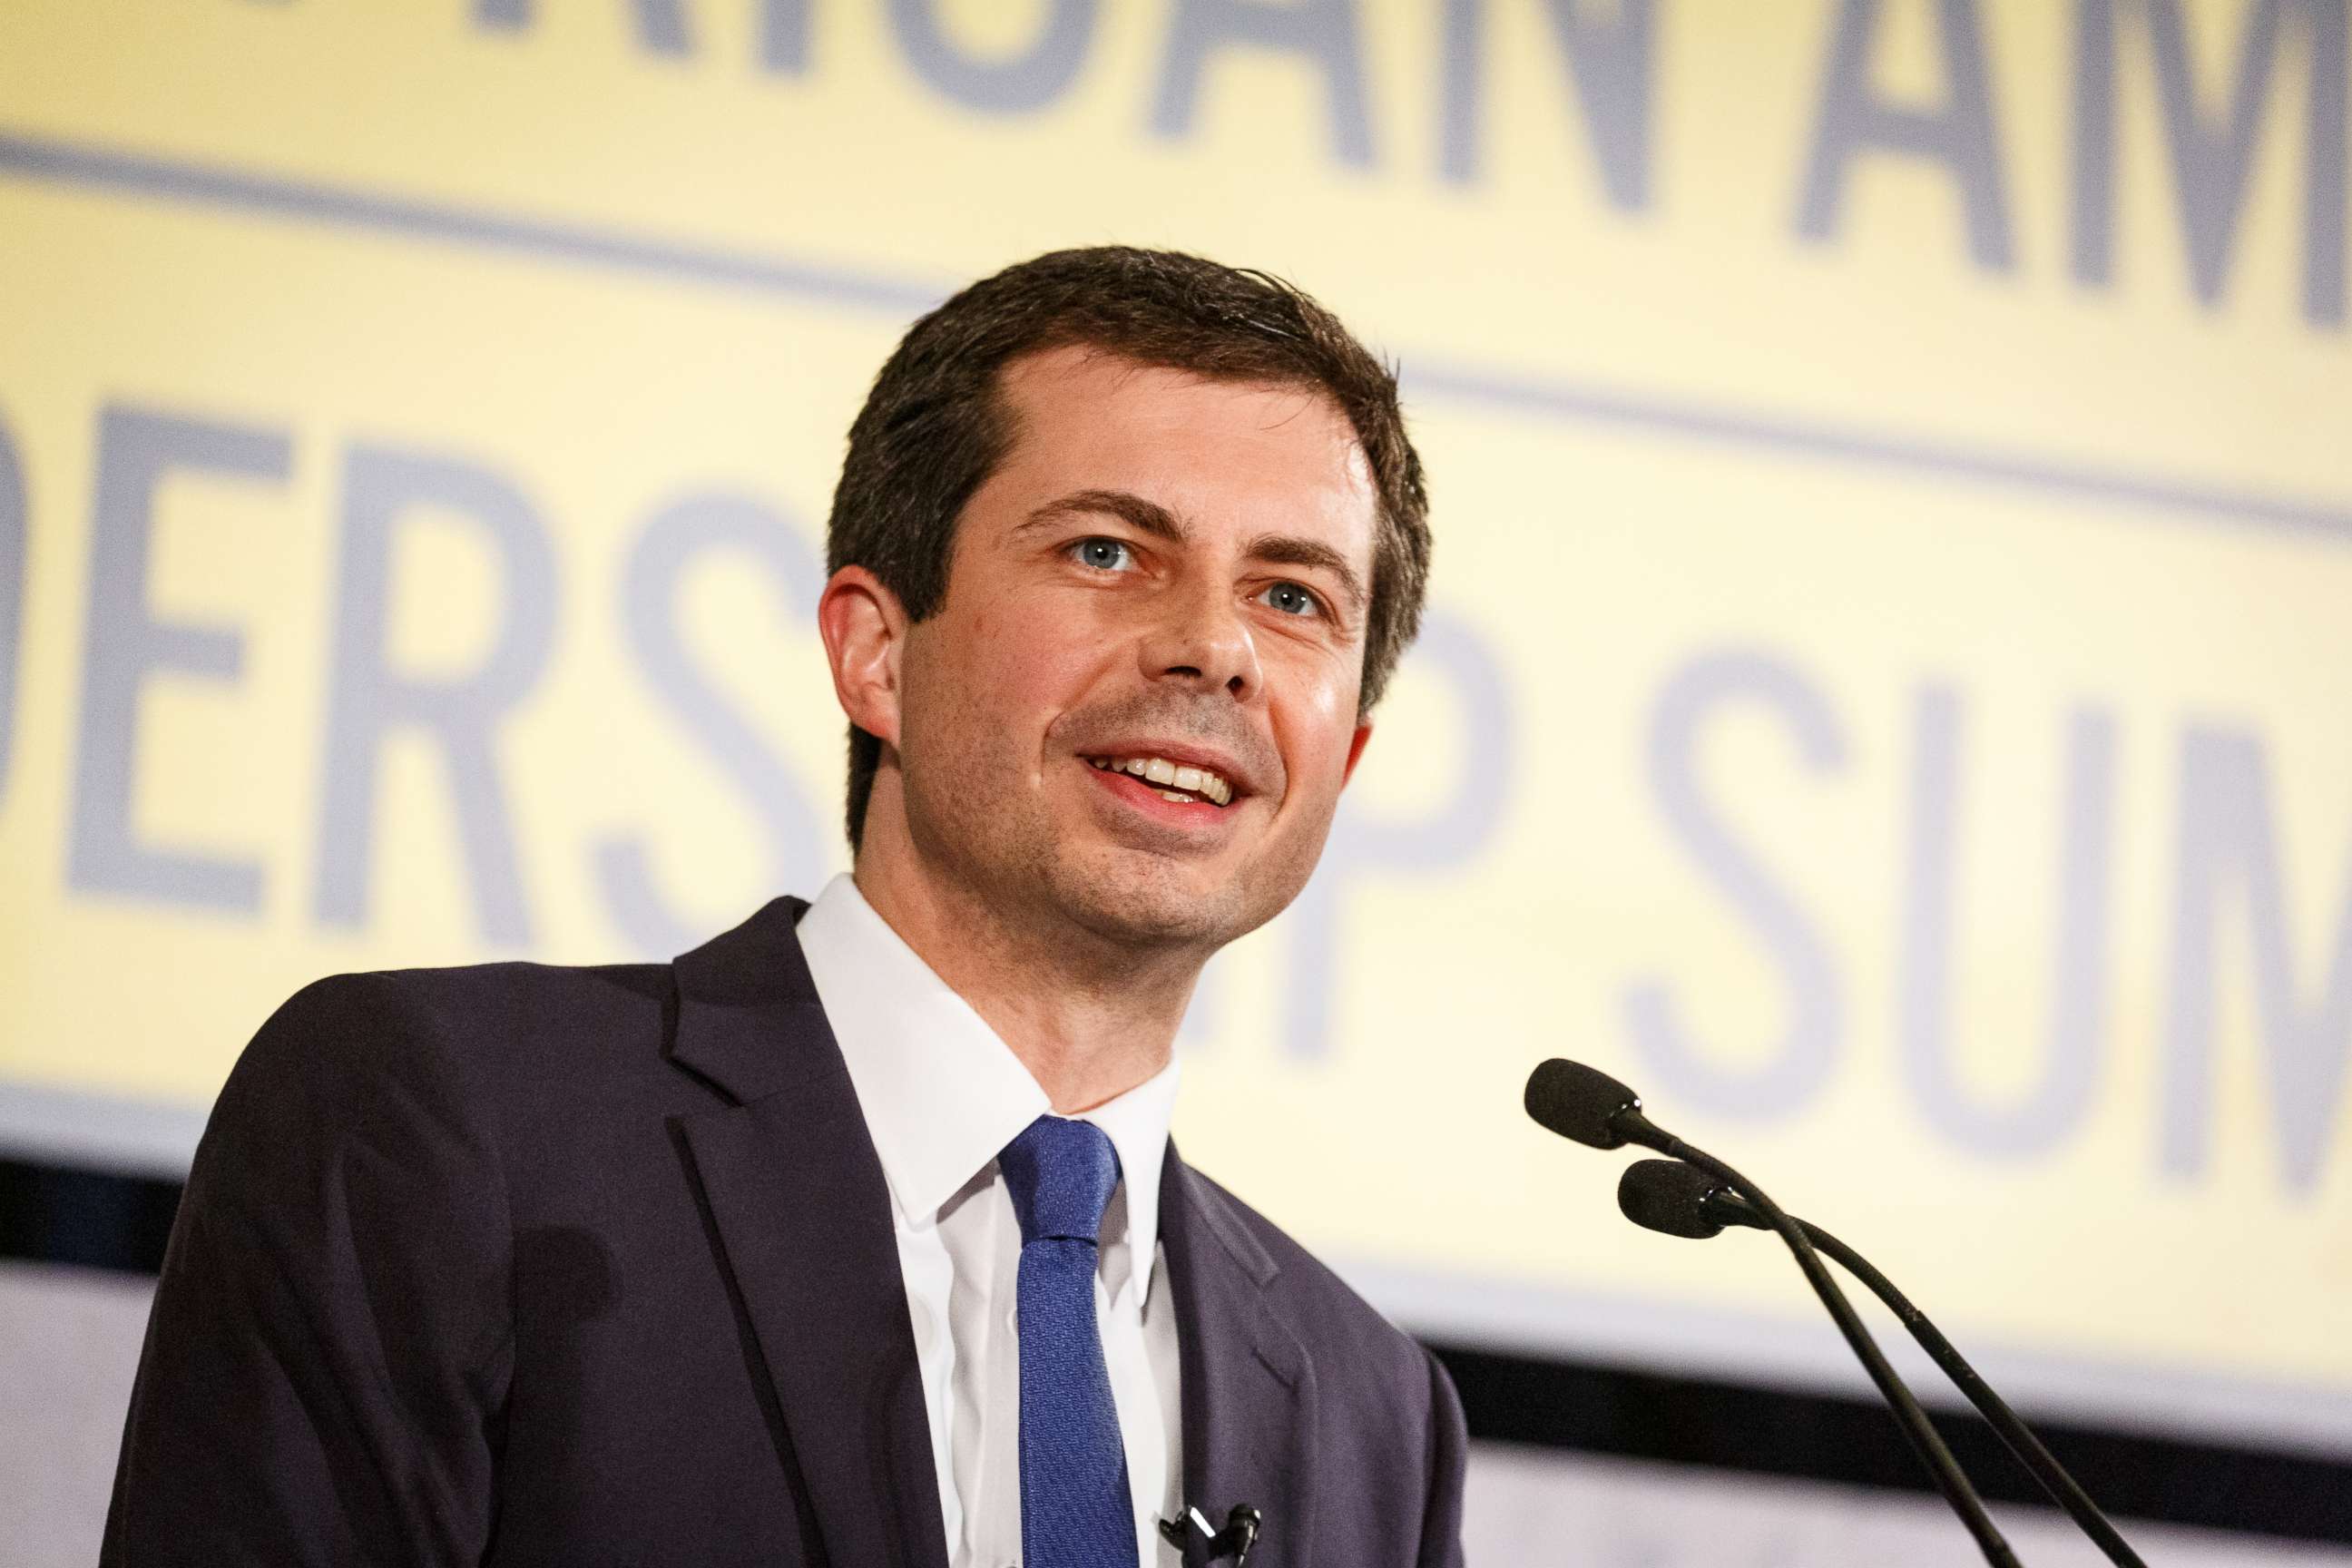 PHOTO: Democratic presidential candidate Mayor Pete Buttigieg speaks to a crowd at the African American Leadership Council, June 6, 2019, in Atlanta.